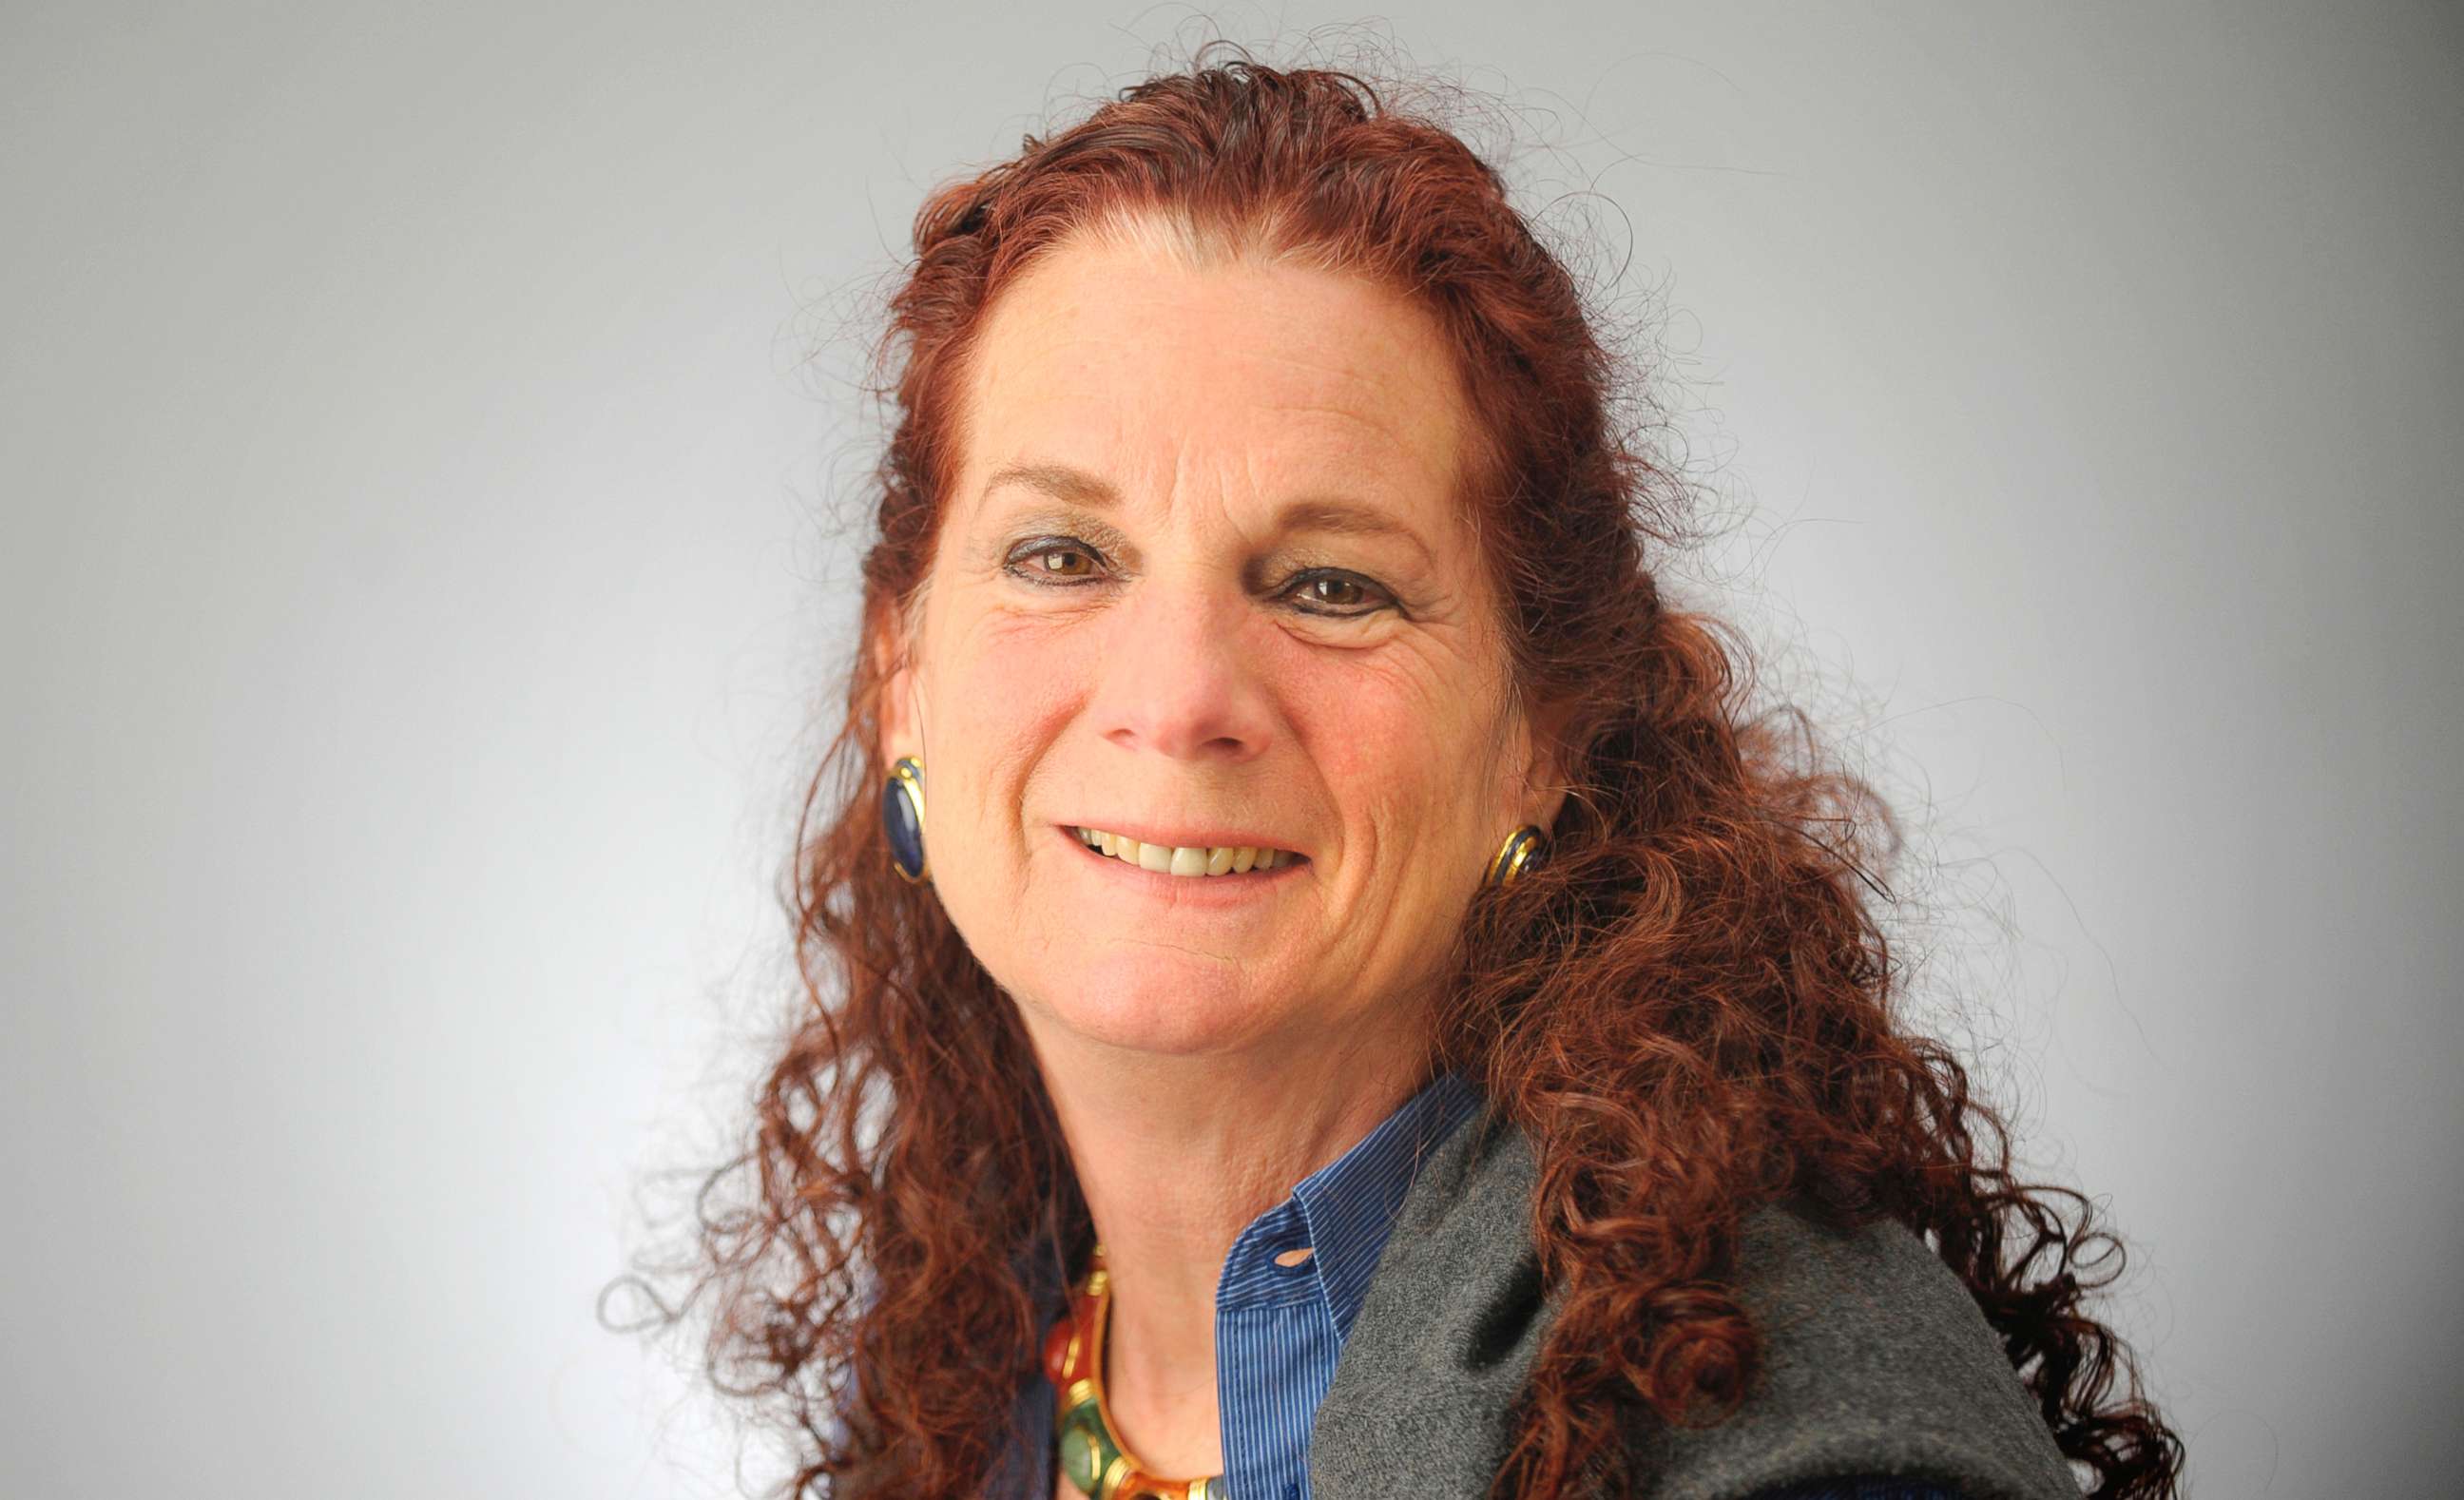 PHOTO: This undated photo shows Wendi Winters, reporter for the Capital Gazette. Winters was one of the victims when an active shooter targeted the newsroom on June 28, 2018, in Annapolis, Md.